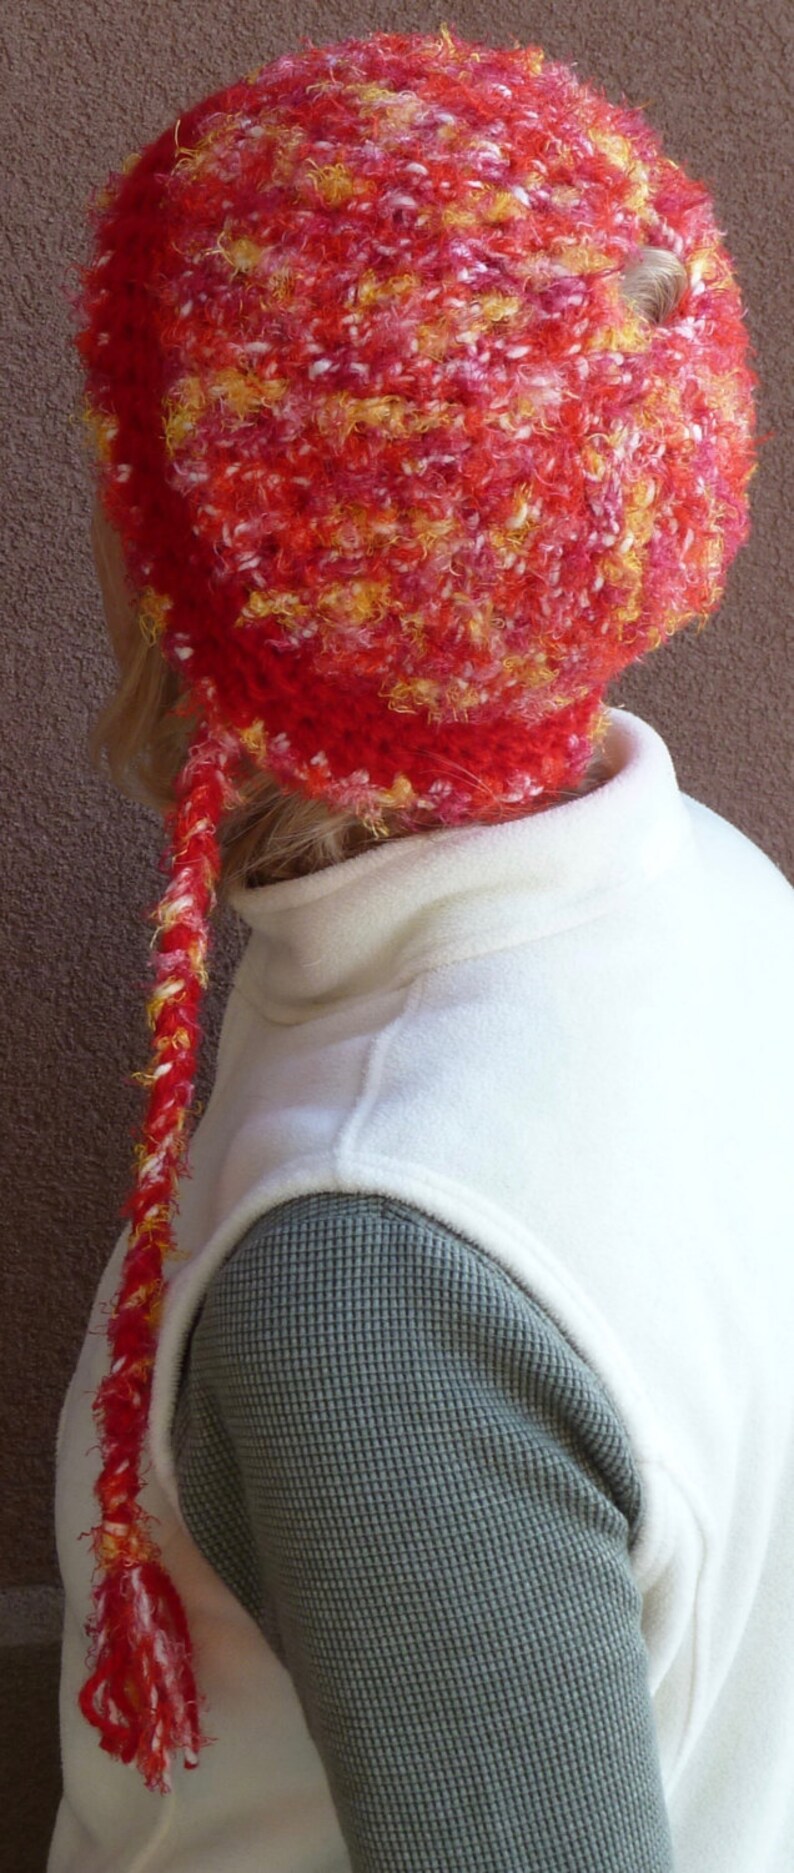 Red winter hat / crochet ponytail hat / winter hat / handmade crochet hat / unique and one of a kind hat / red winter hat with a tail image 2